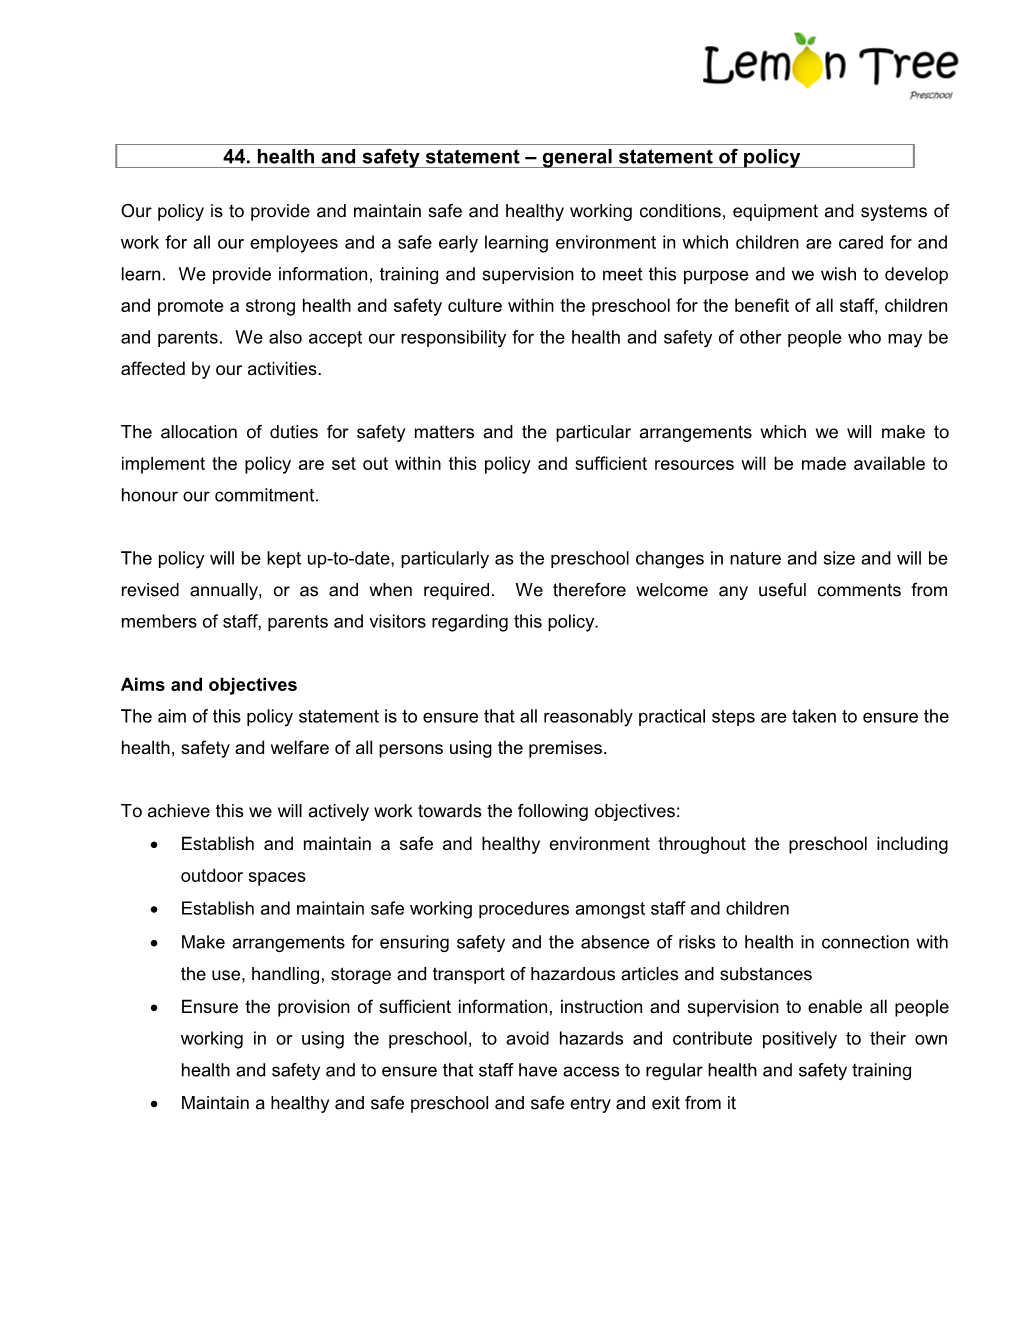 44. Health and Safety Statement General Statement of Policy